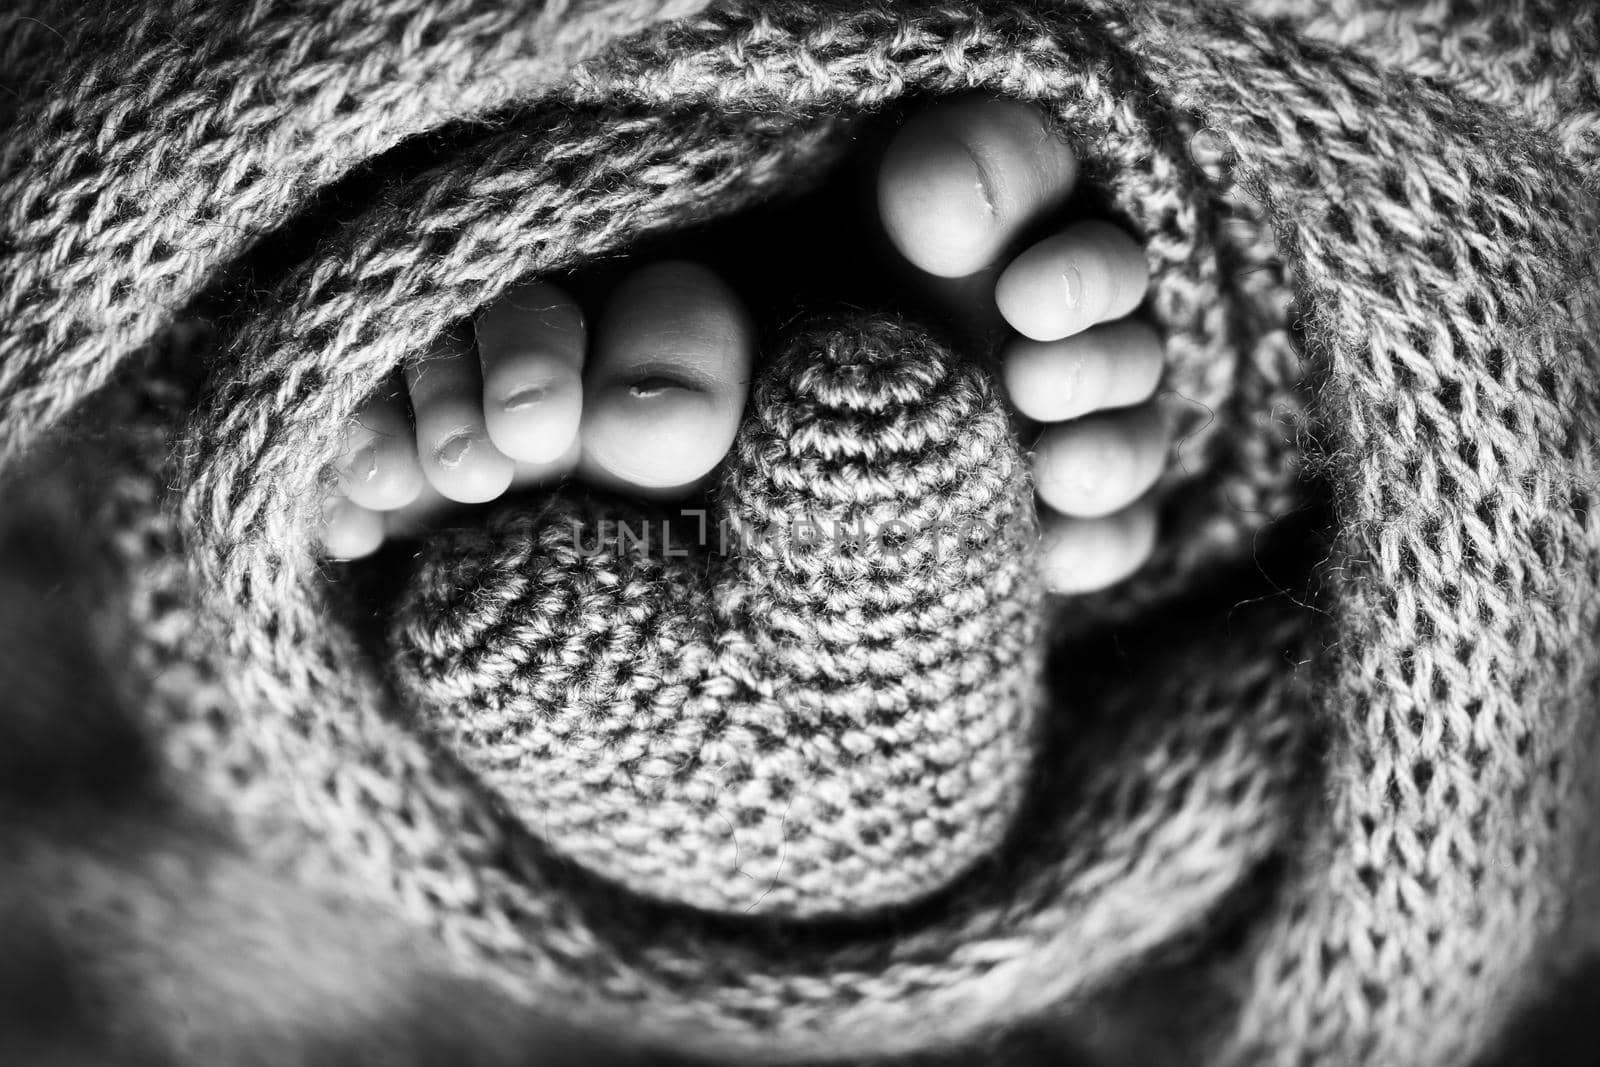 Feet of a newborn with a wooden heart, wrapped in a soft blanket. Black and white studio photography. by Vad-Len